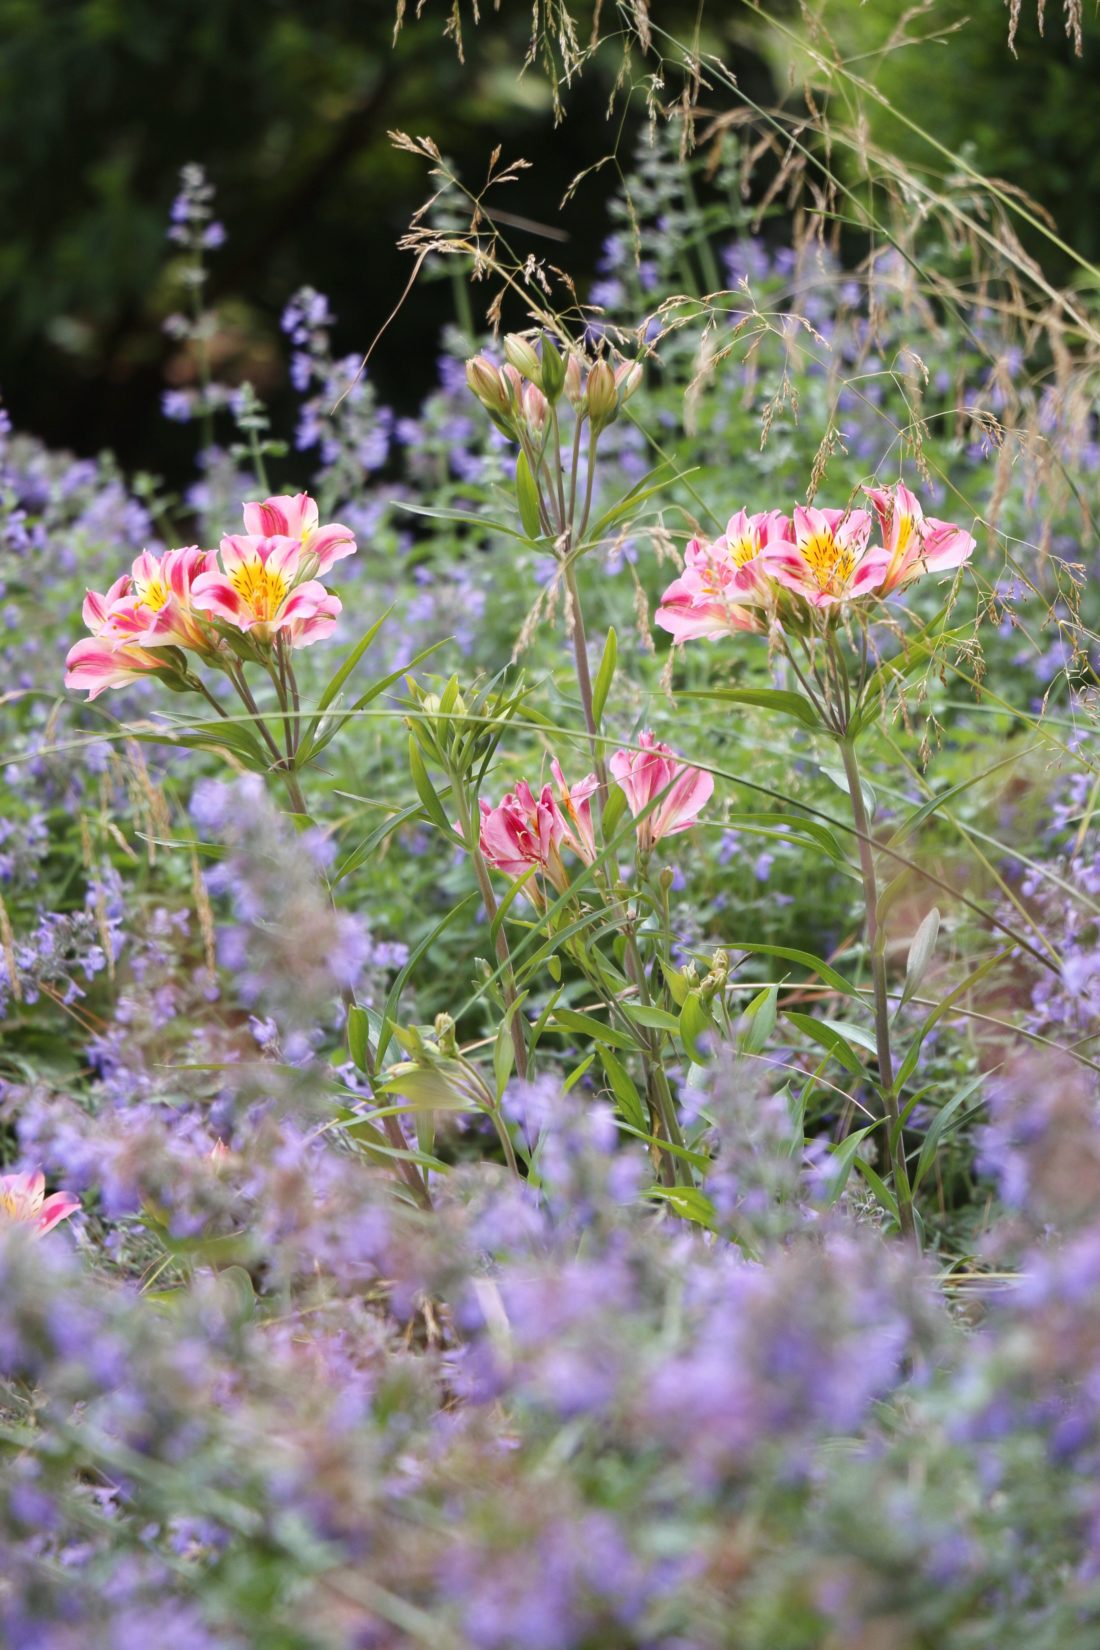 peruvian lilies and catmint in a garden